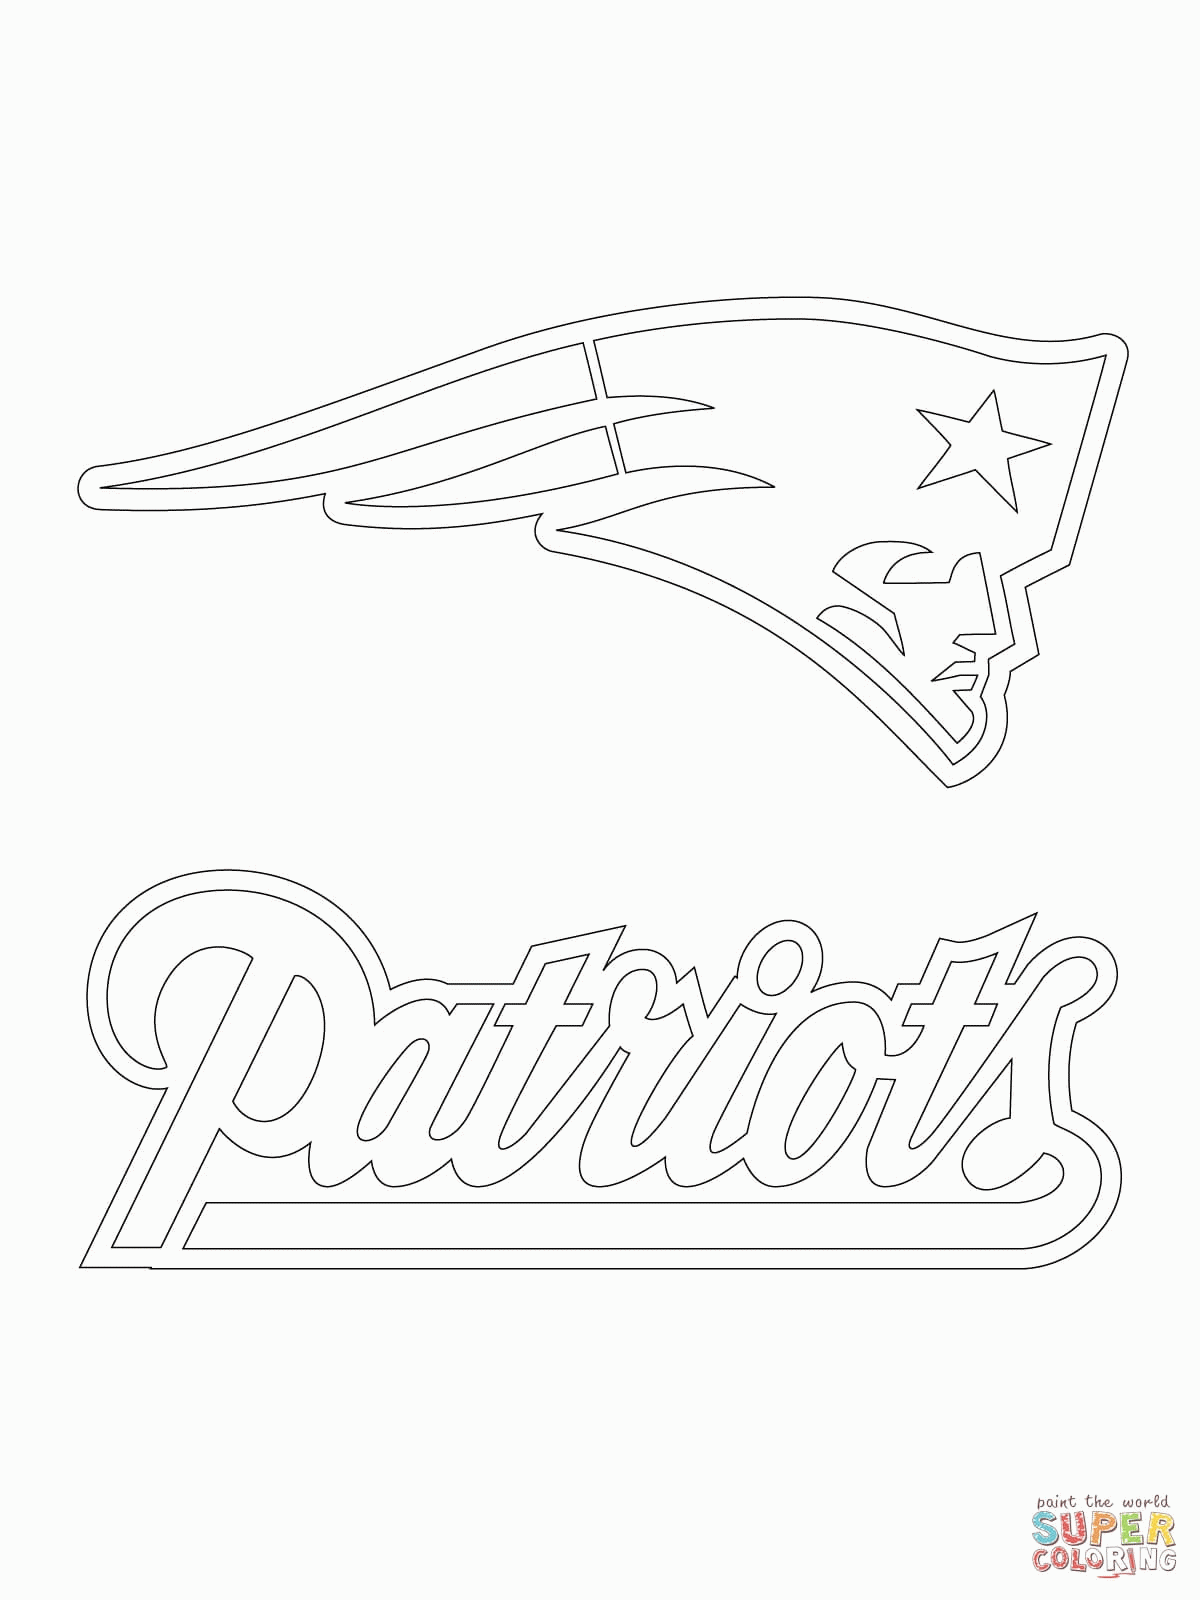 green bay packers coloring pages free green bay packers logo coloring page part 1 free green coloring free pages bay packers 